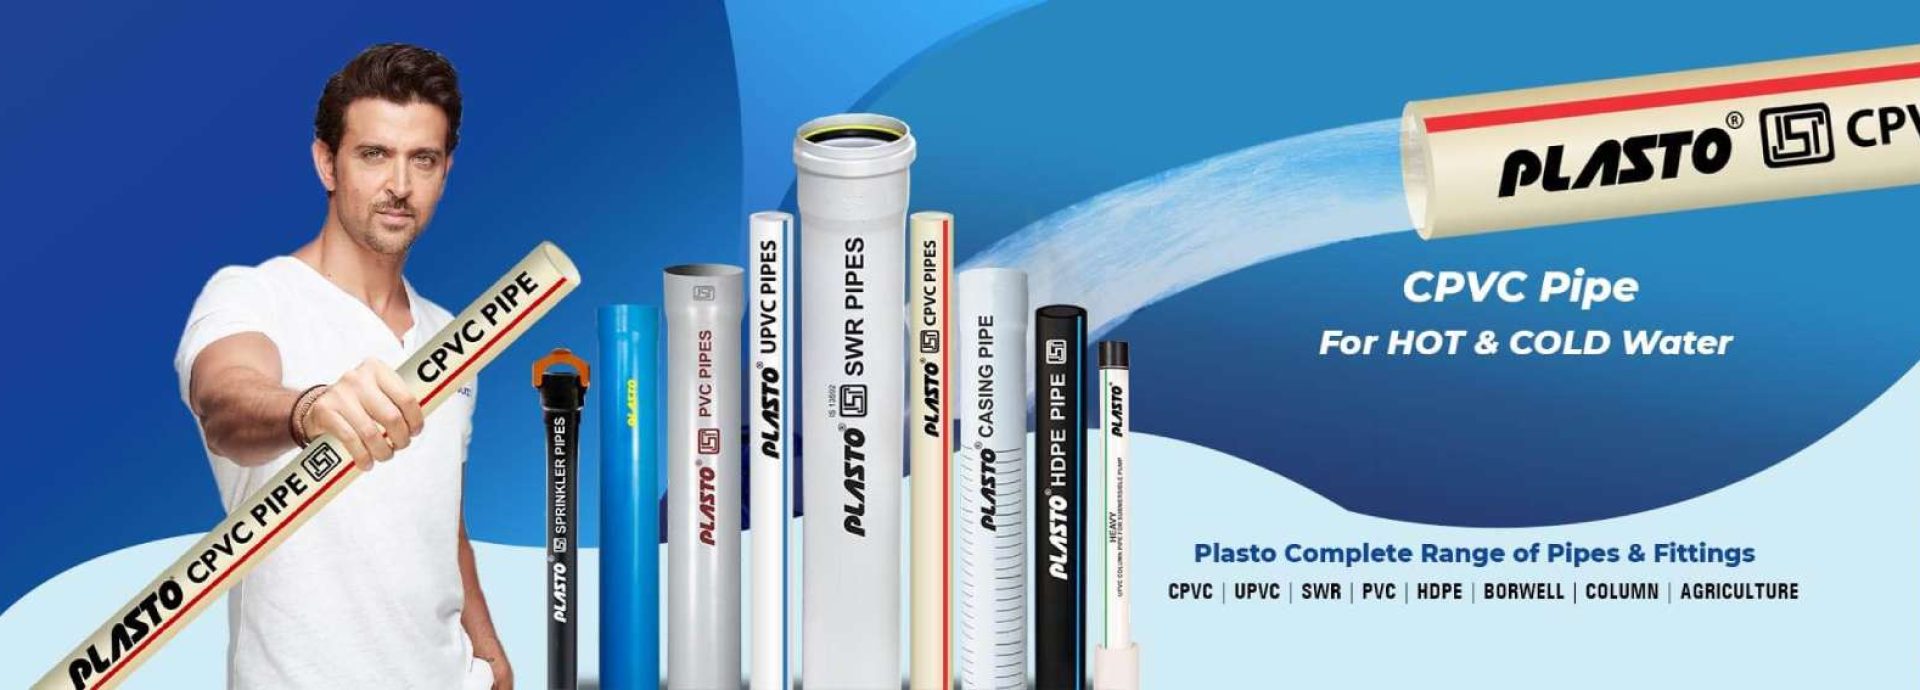 Pipes and Fittings Web Banner